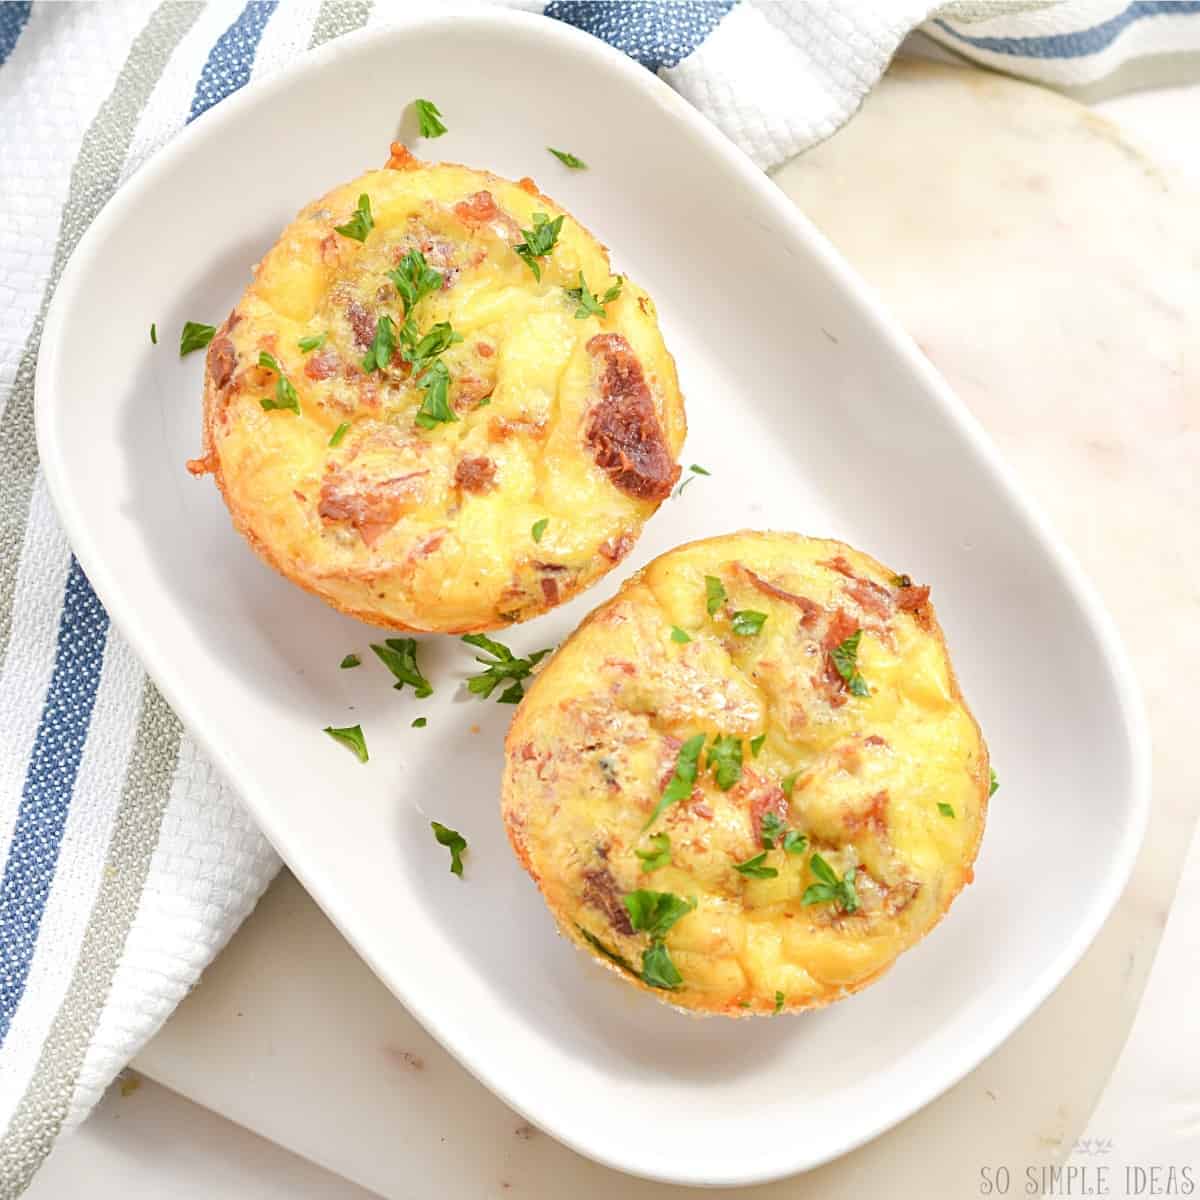 keto egg muffins featured image